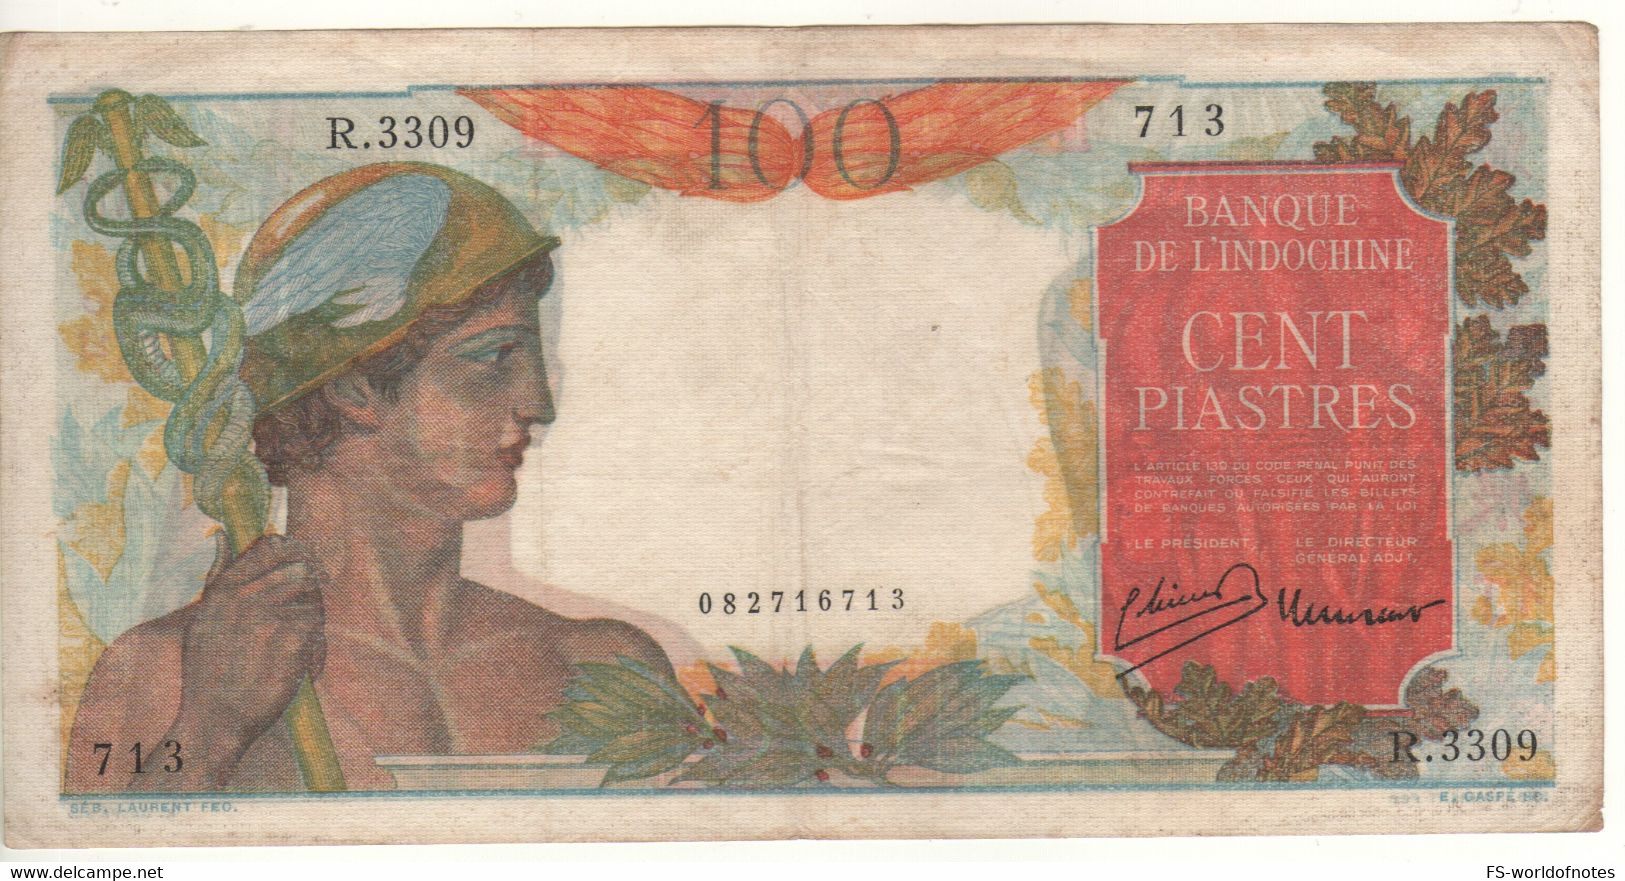 FRENCH INDOCHINA   100  Piastres  / Đồng / Riels / Kip    P82b   ( Mercury At Front + Elephants At Back ) - Indochine